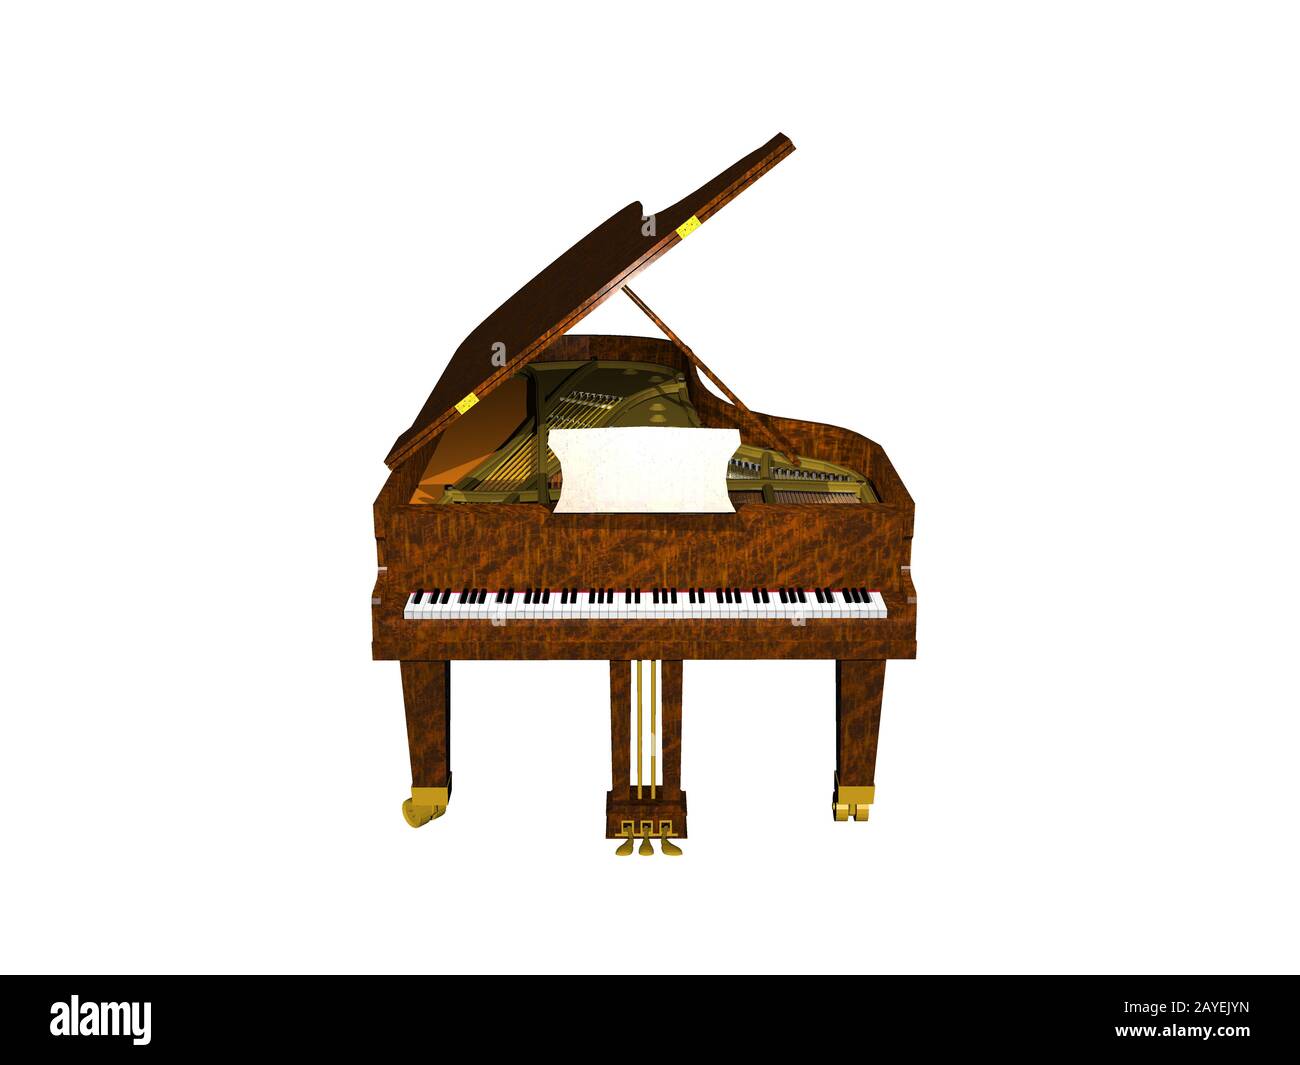 unfolded wooden concert grand piano Stock Photo